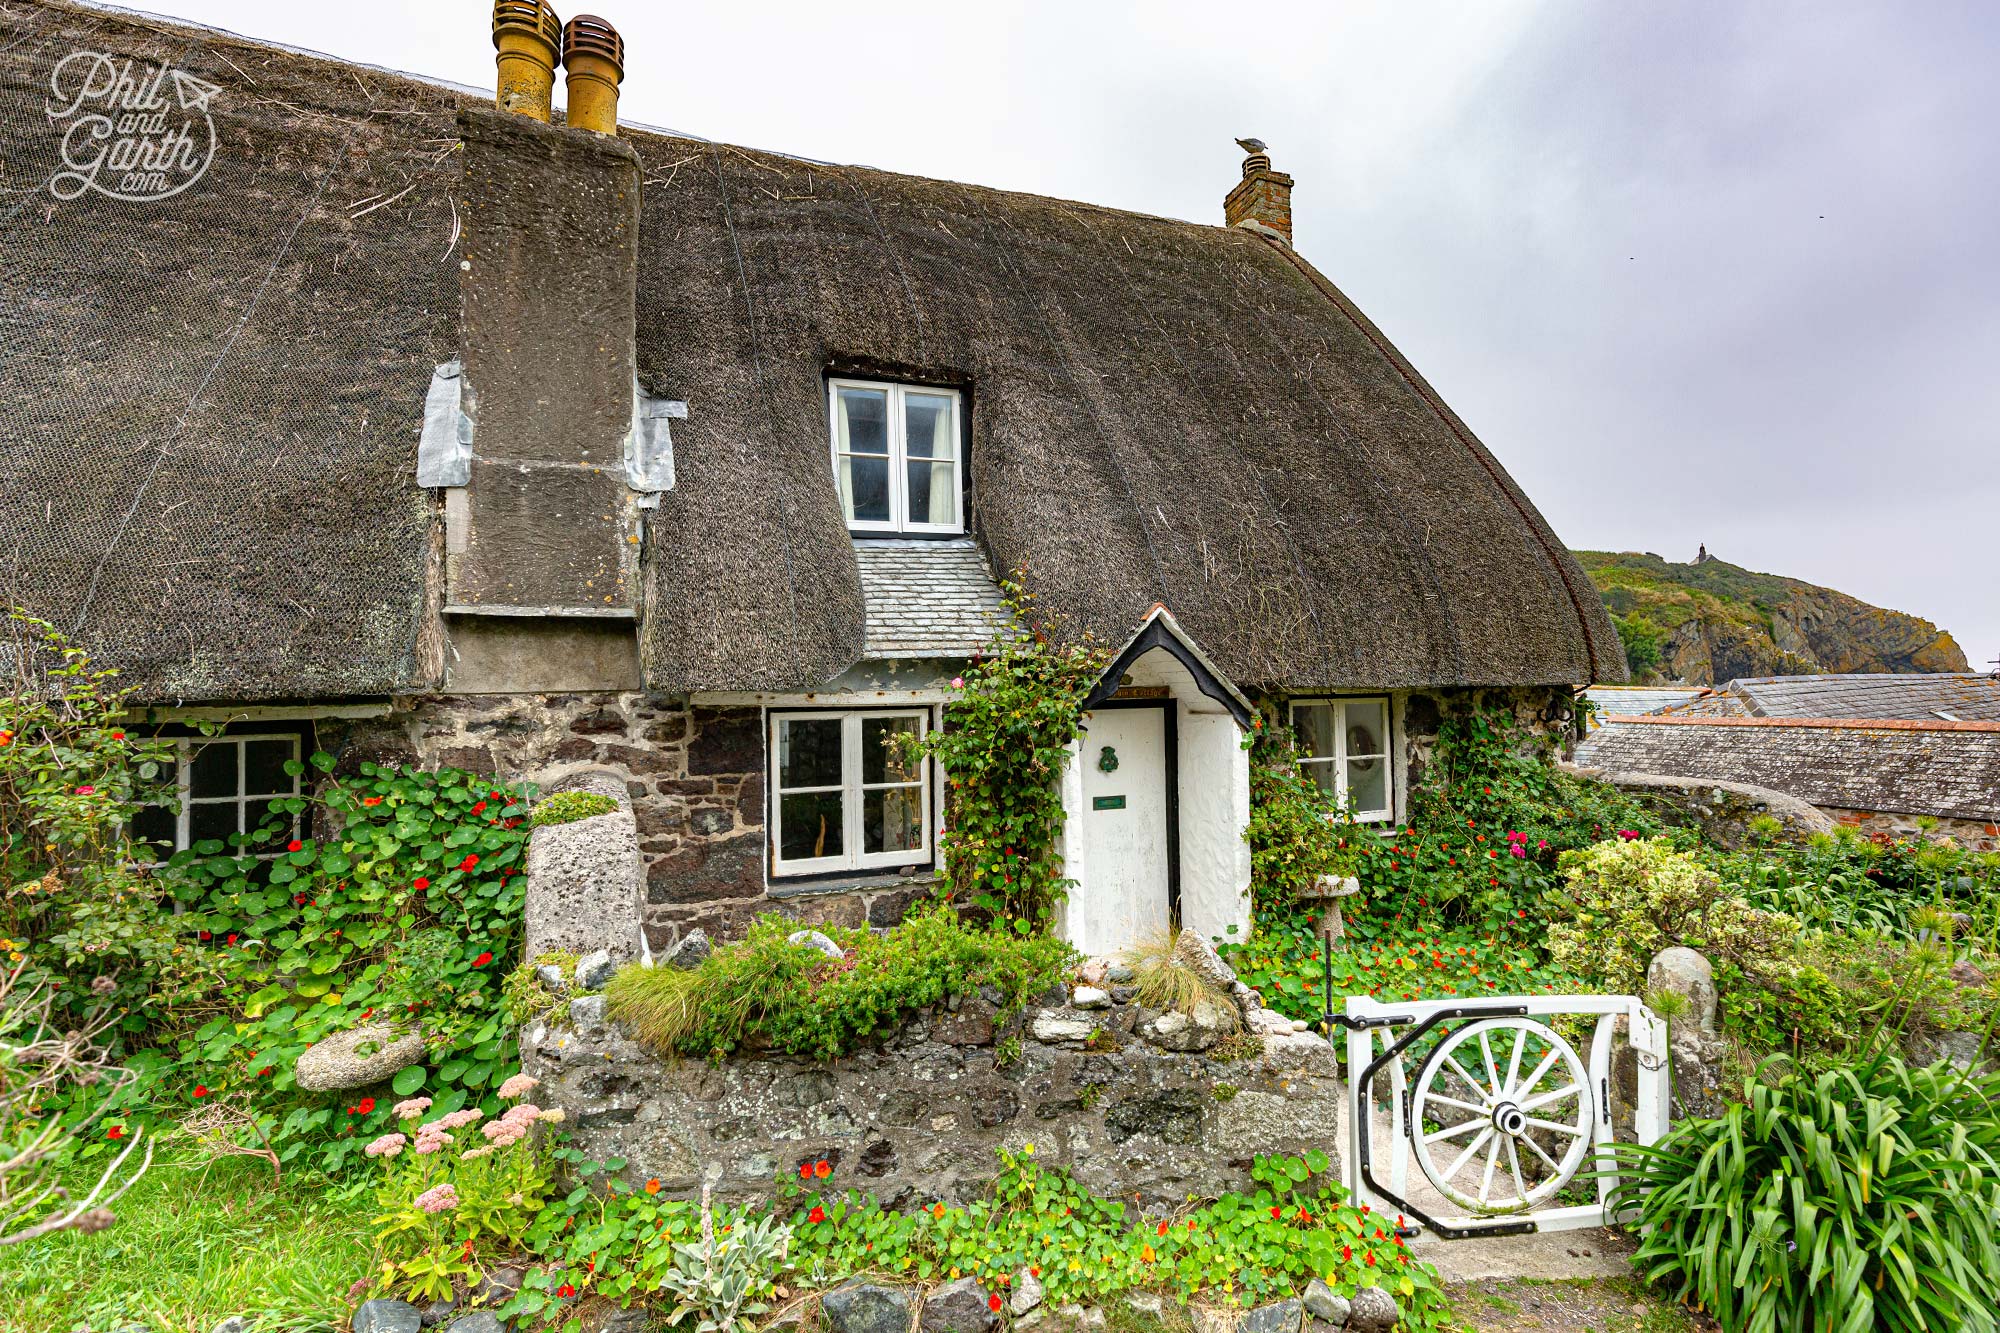 Another gorgeous cottage in Cadgwith Cove